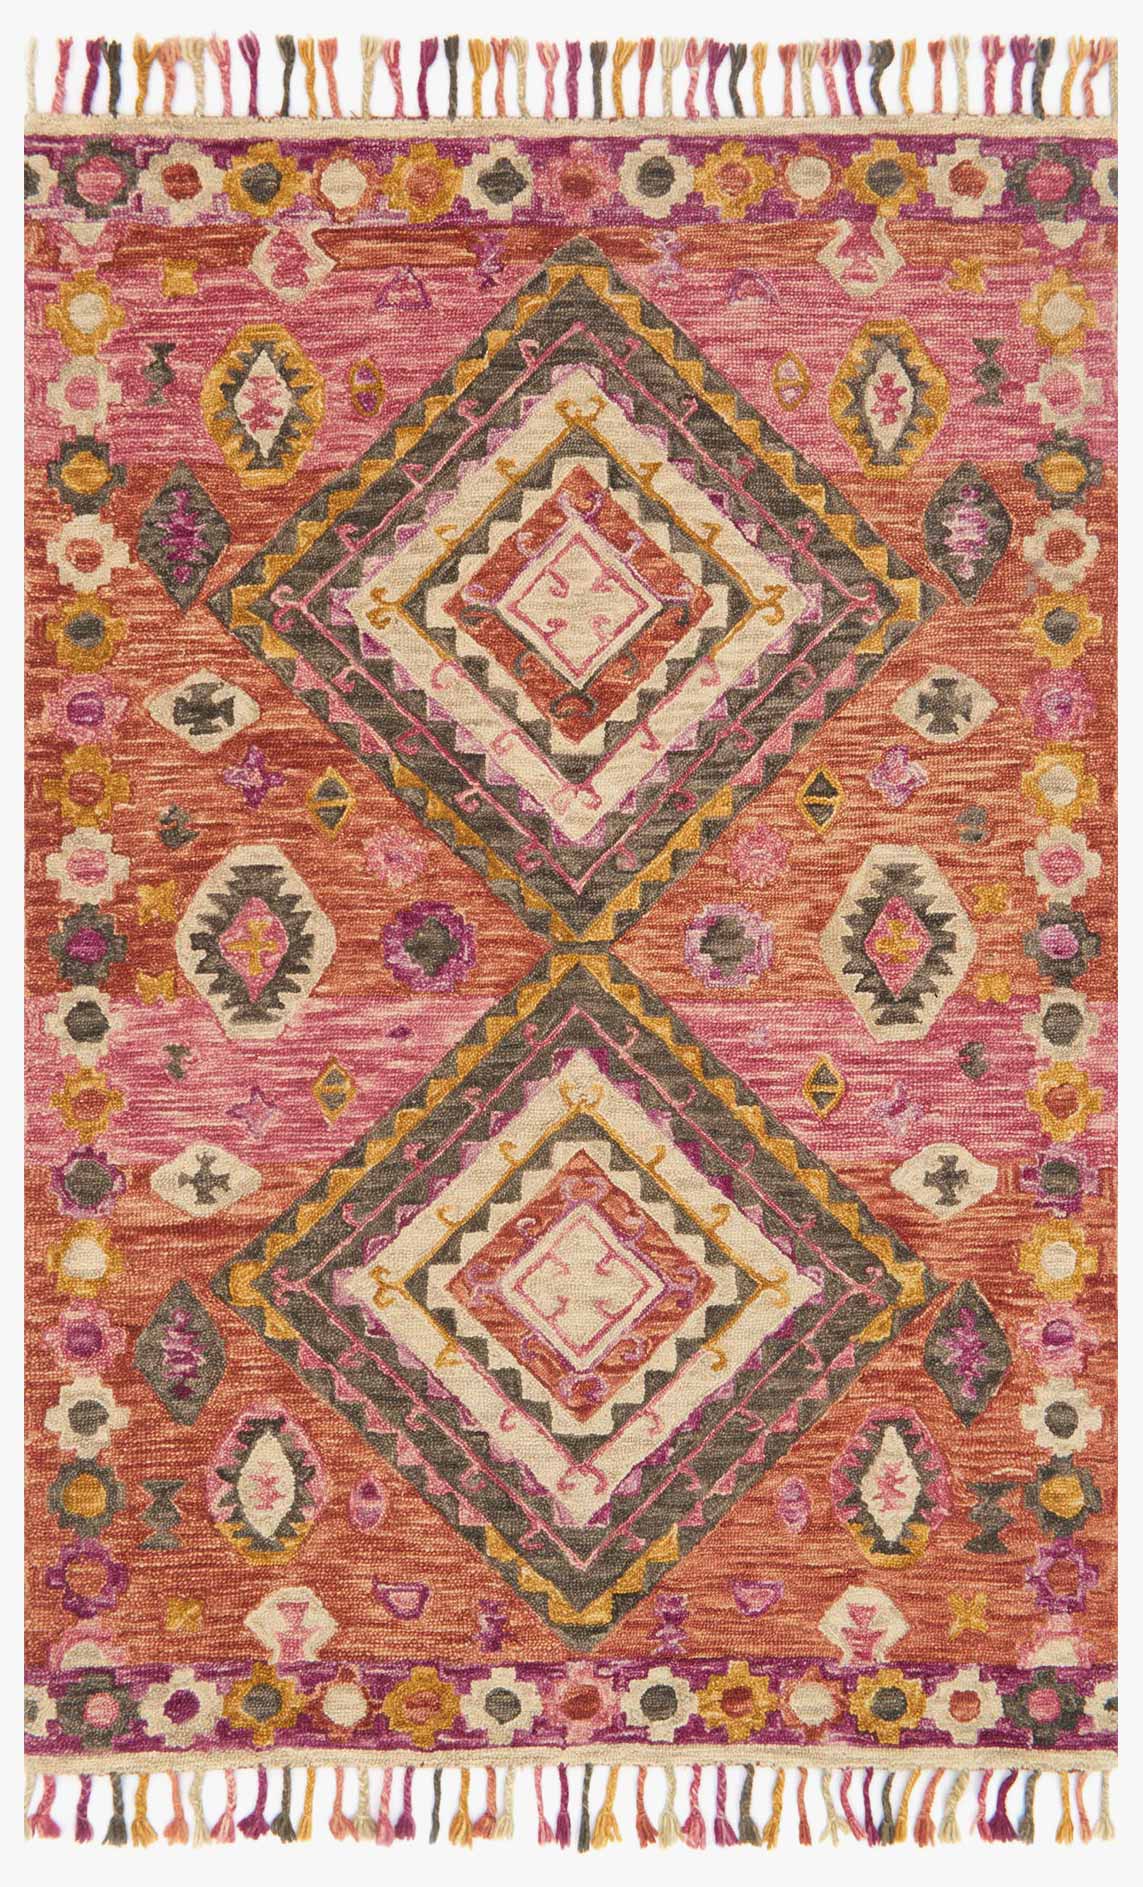 ZR-107: Wool rug - hand knotted